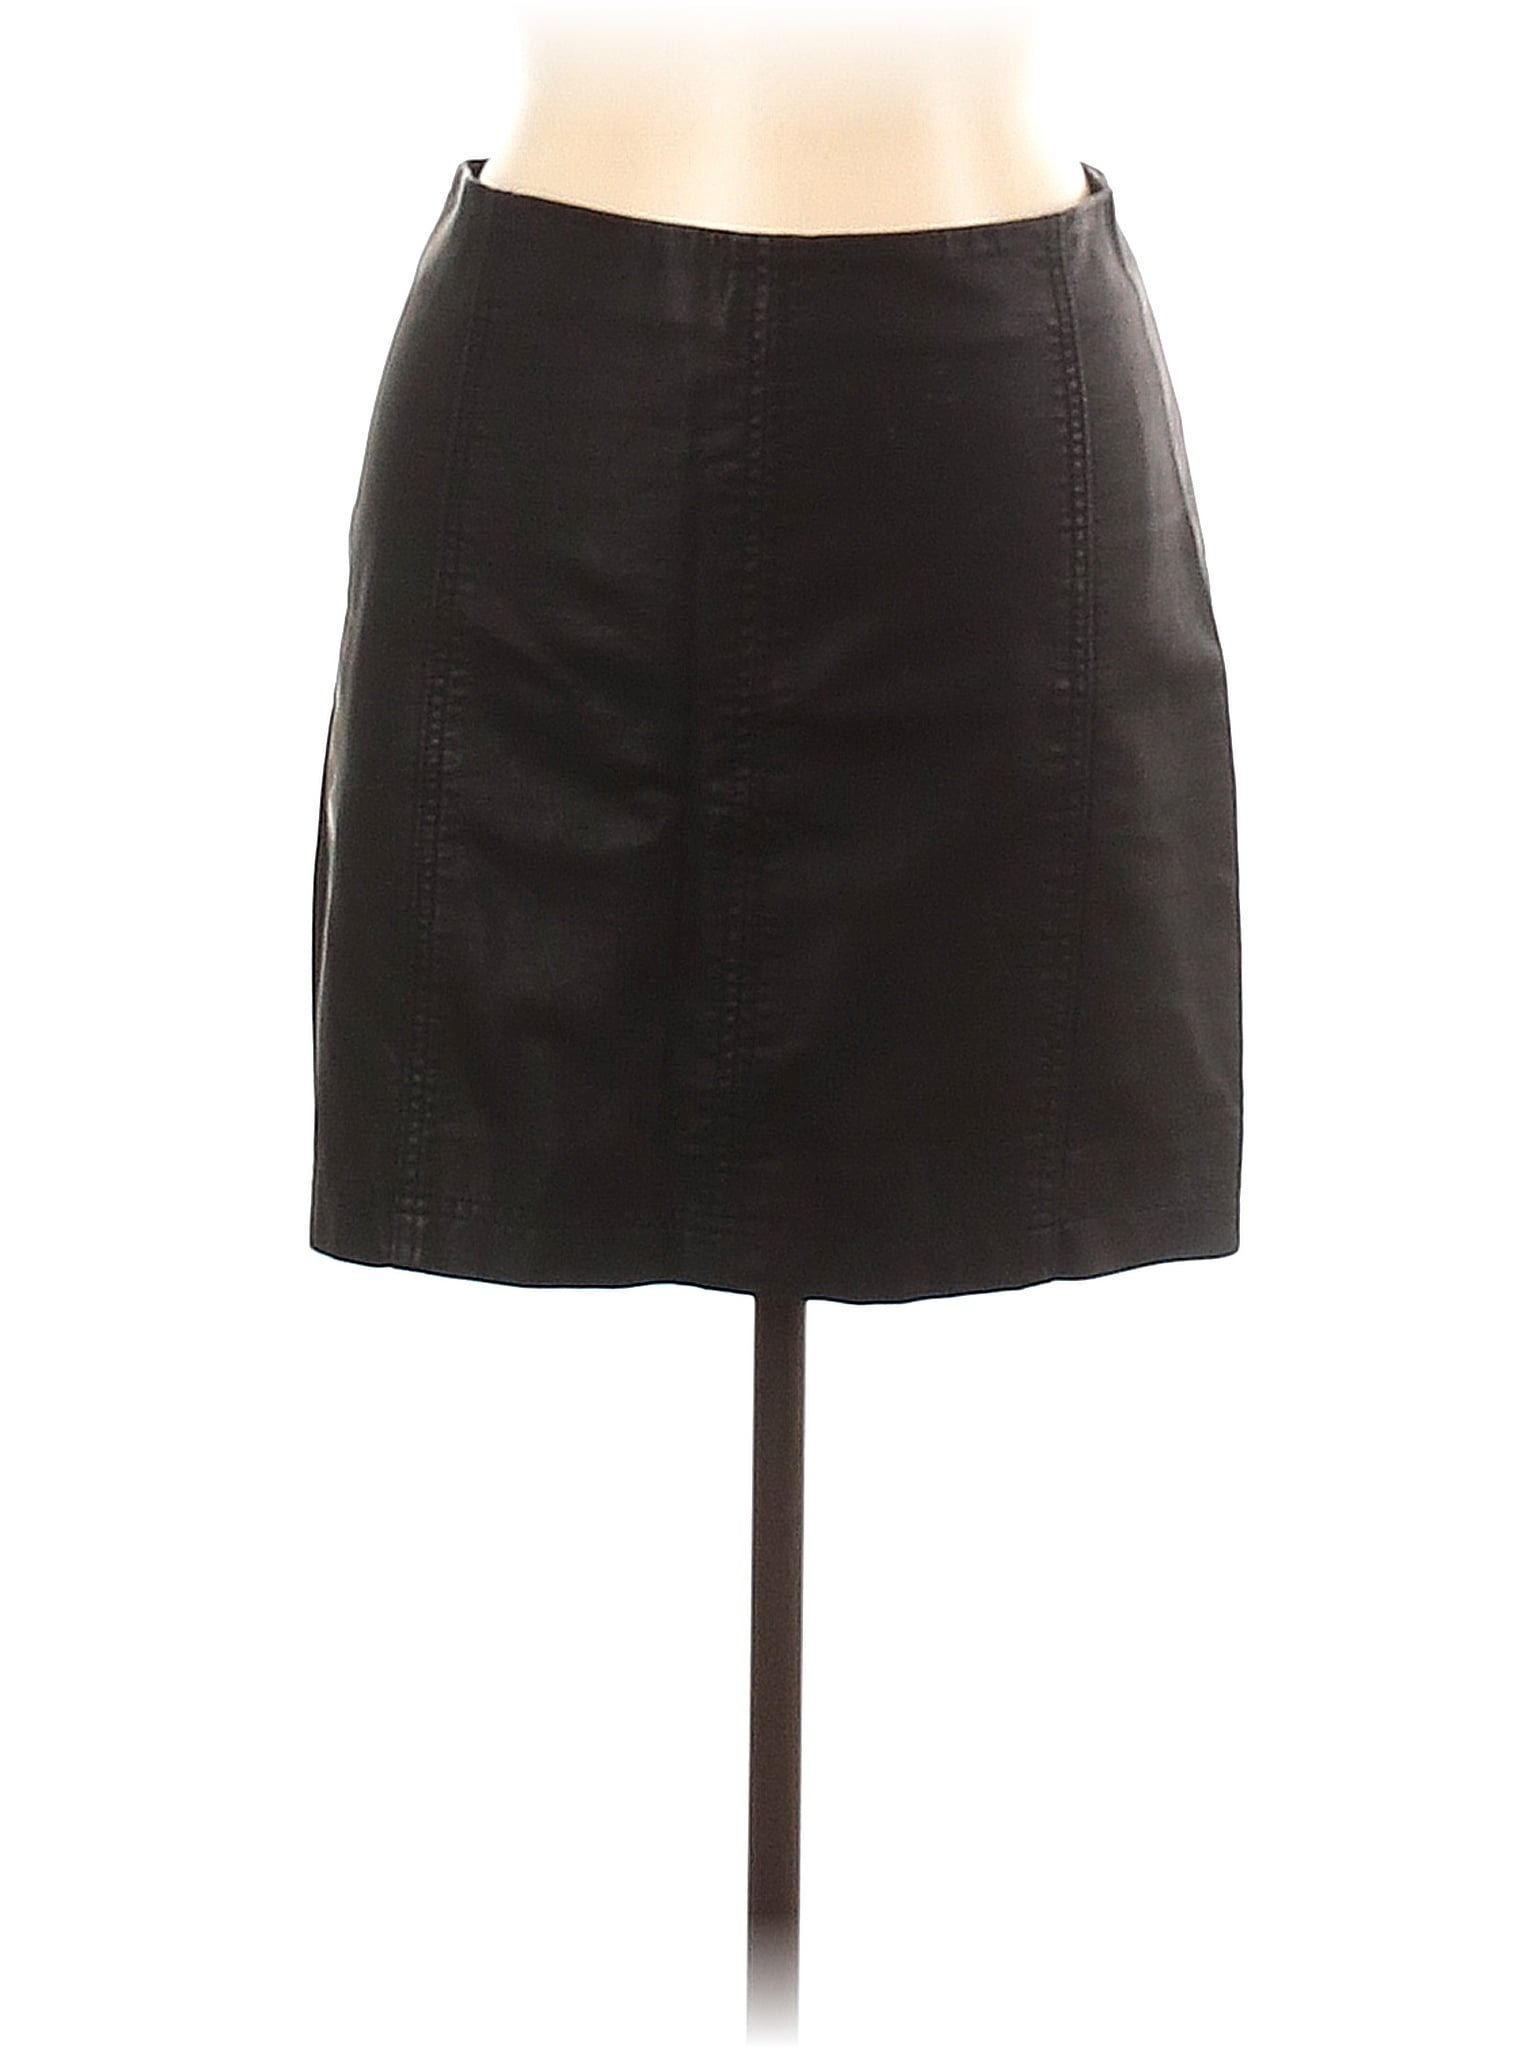 Free People 100% Polyurethane Solid Black Faux Leather Skirt Size 12 ...